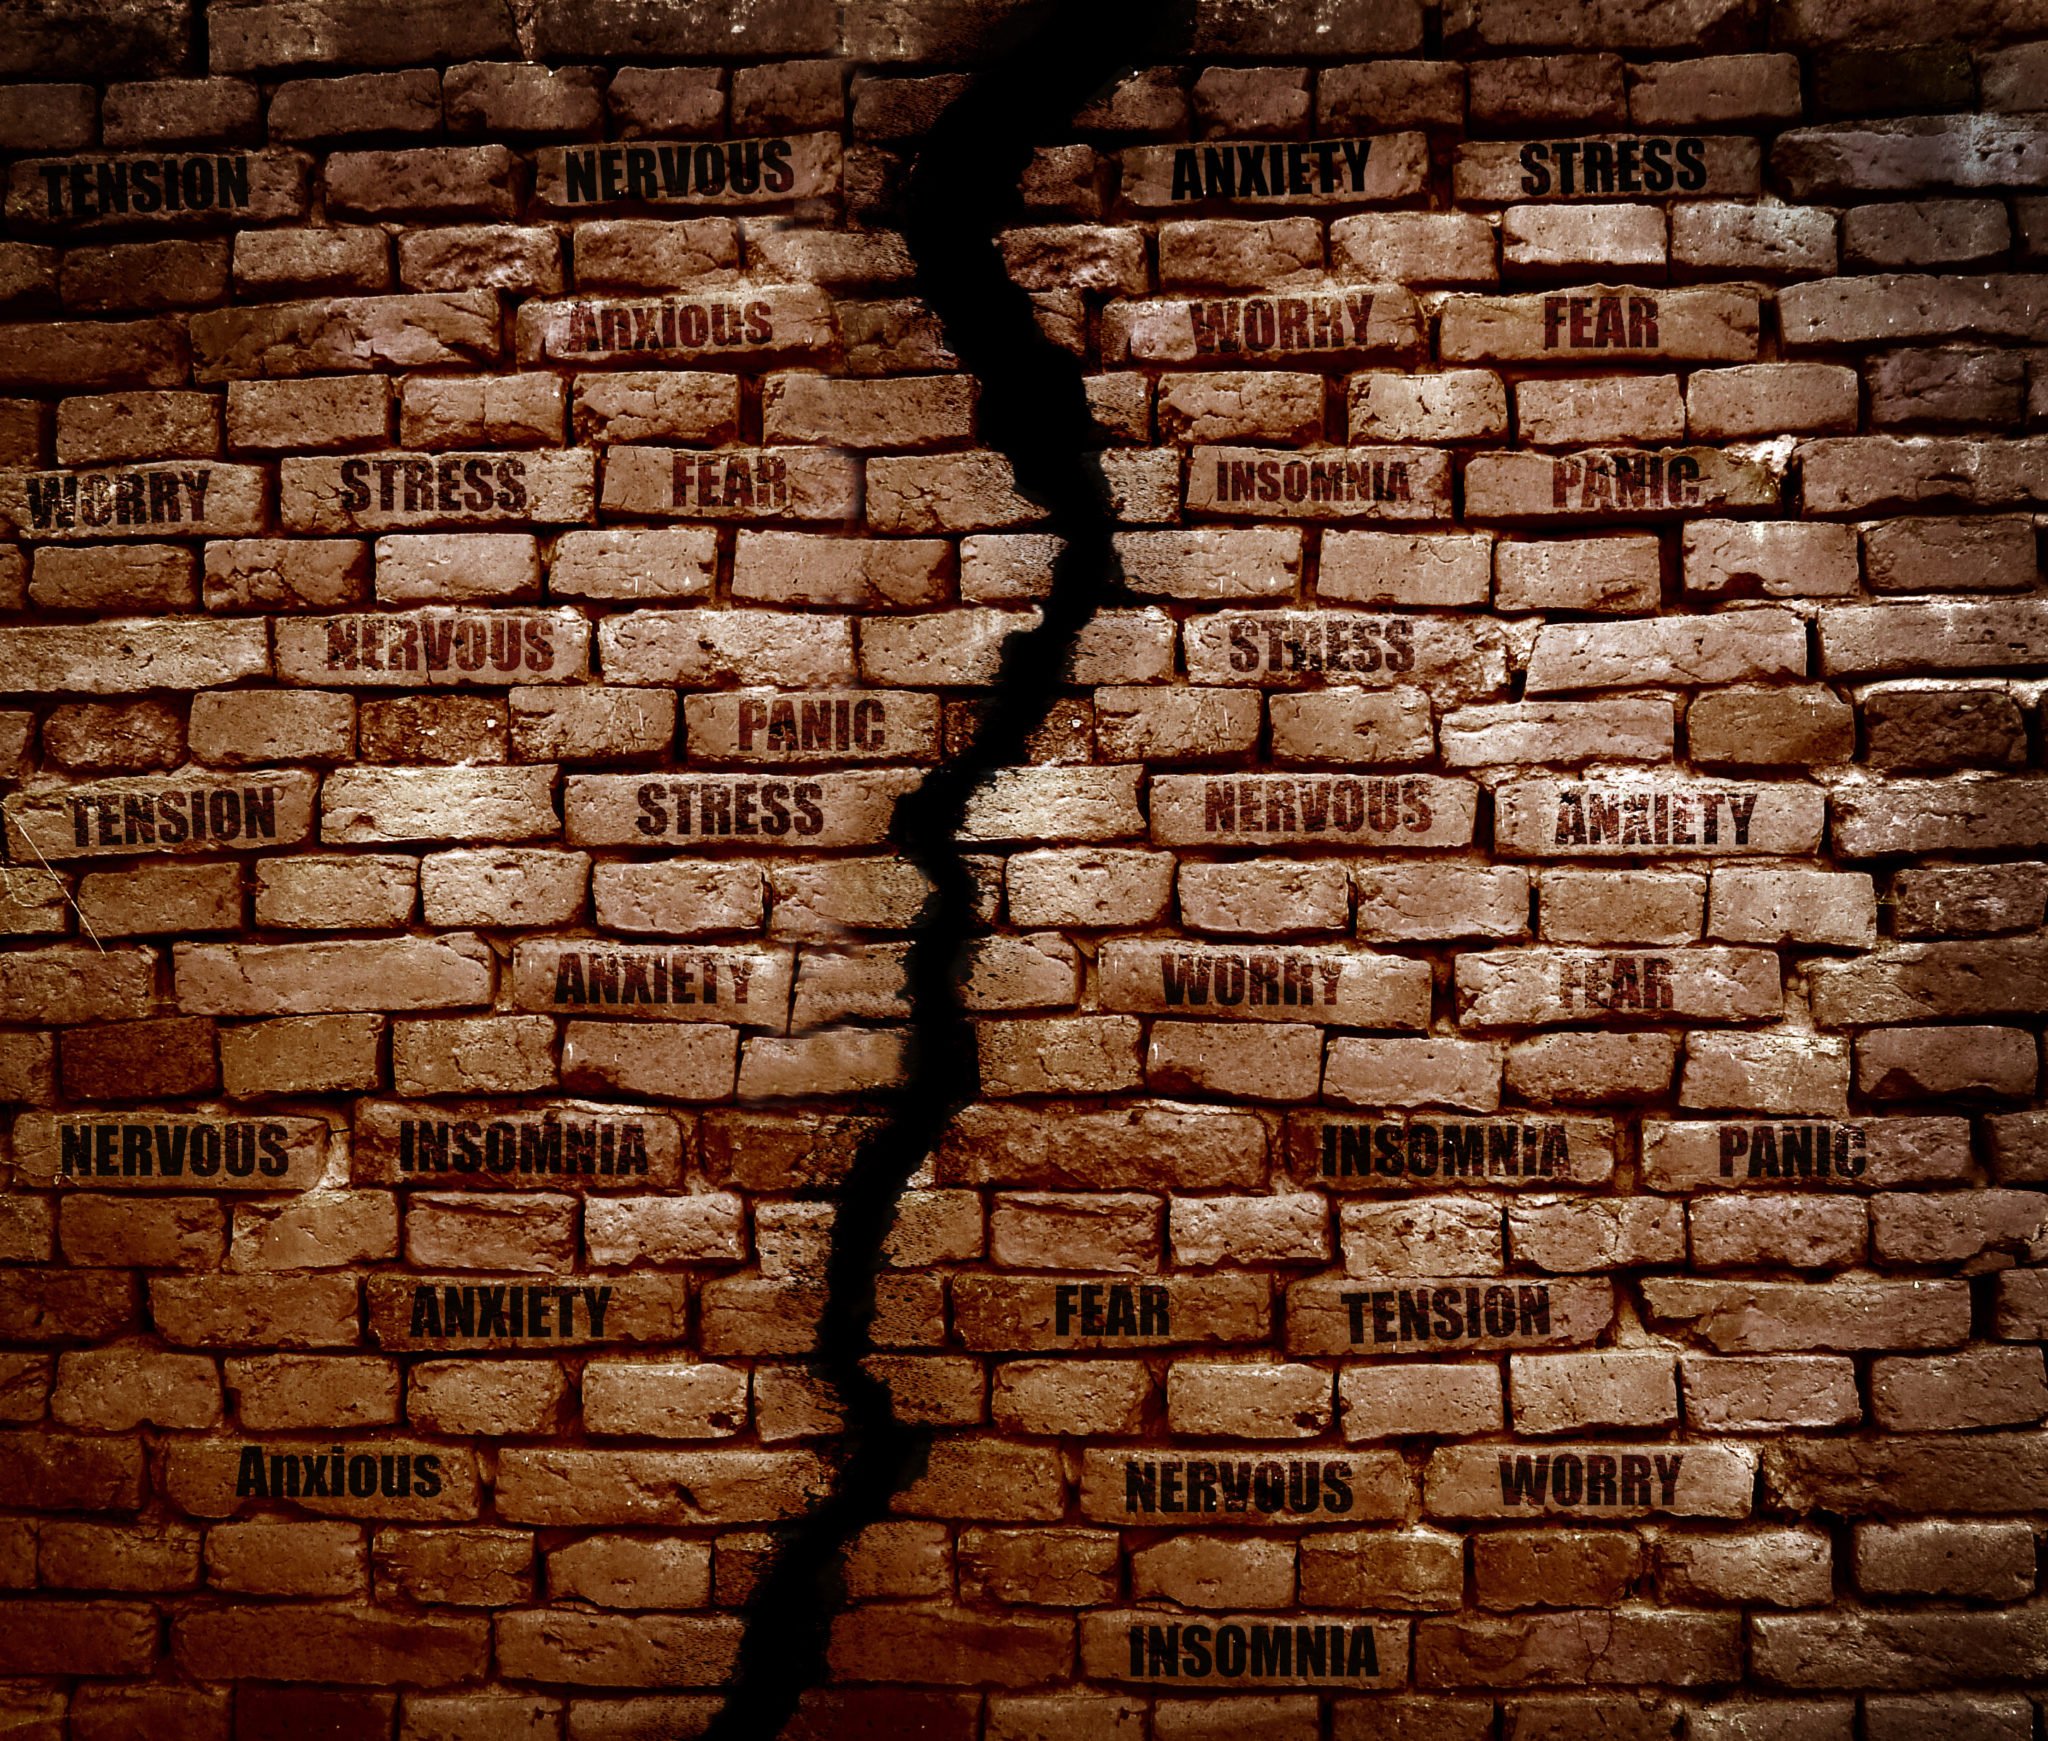 Crack in a brick wall with Stress, anxiety and various related messages